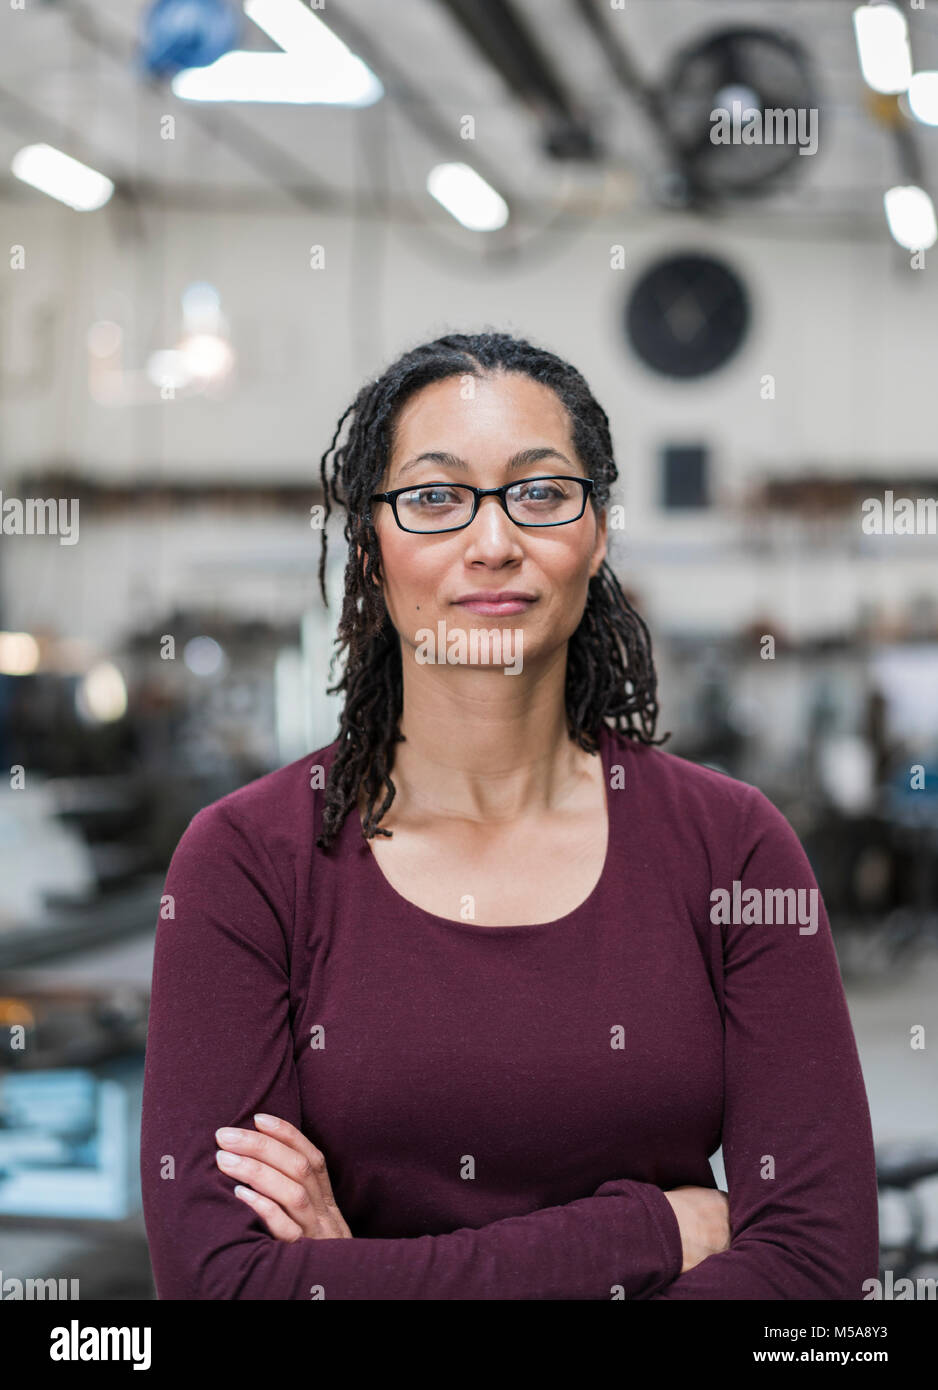 Woman with brown hair wearing glasses standing in metal workshop, smiling at camera. Stock Photo